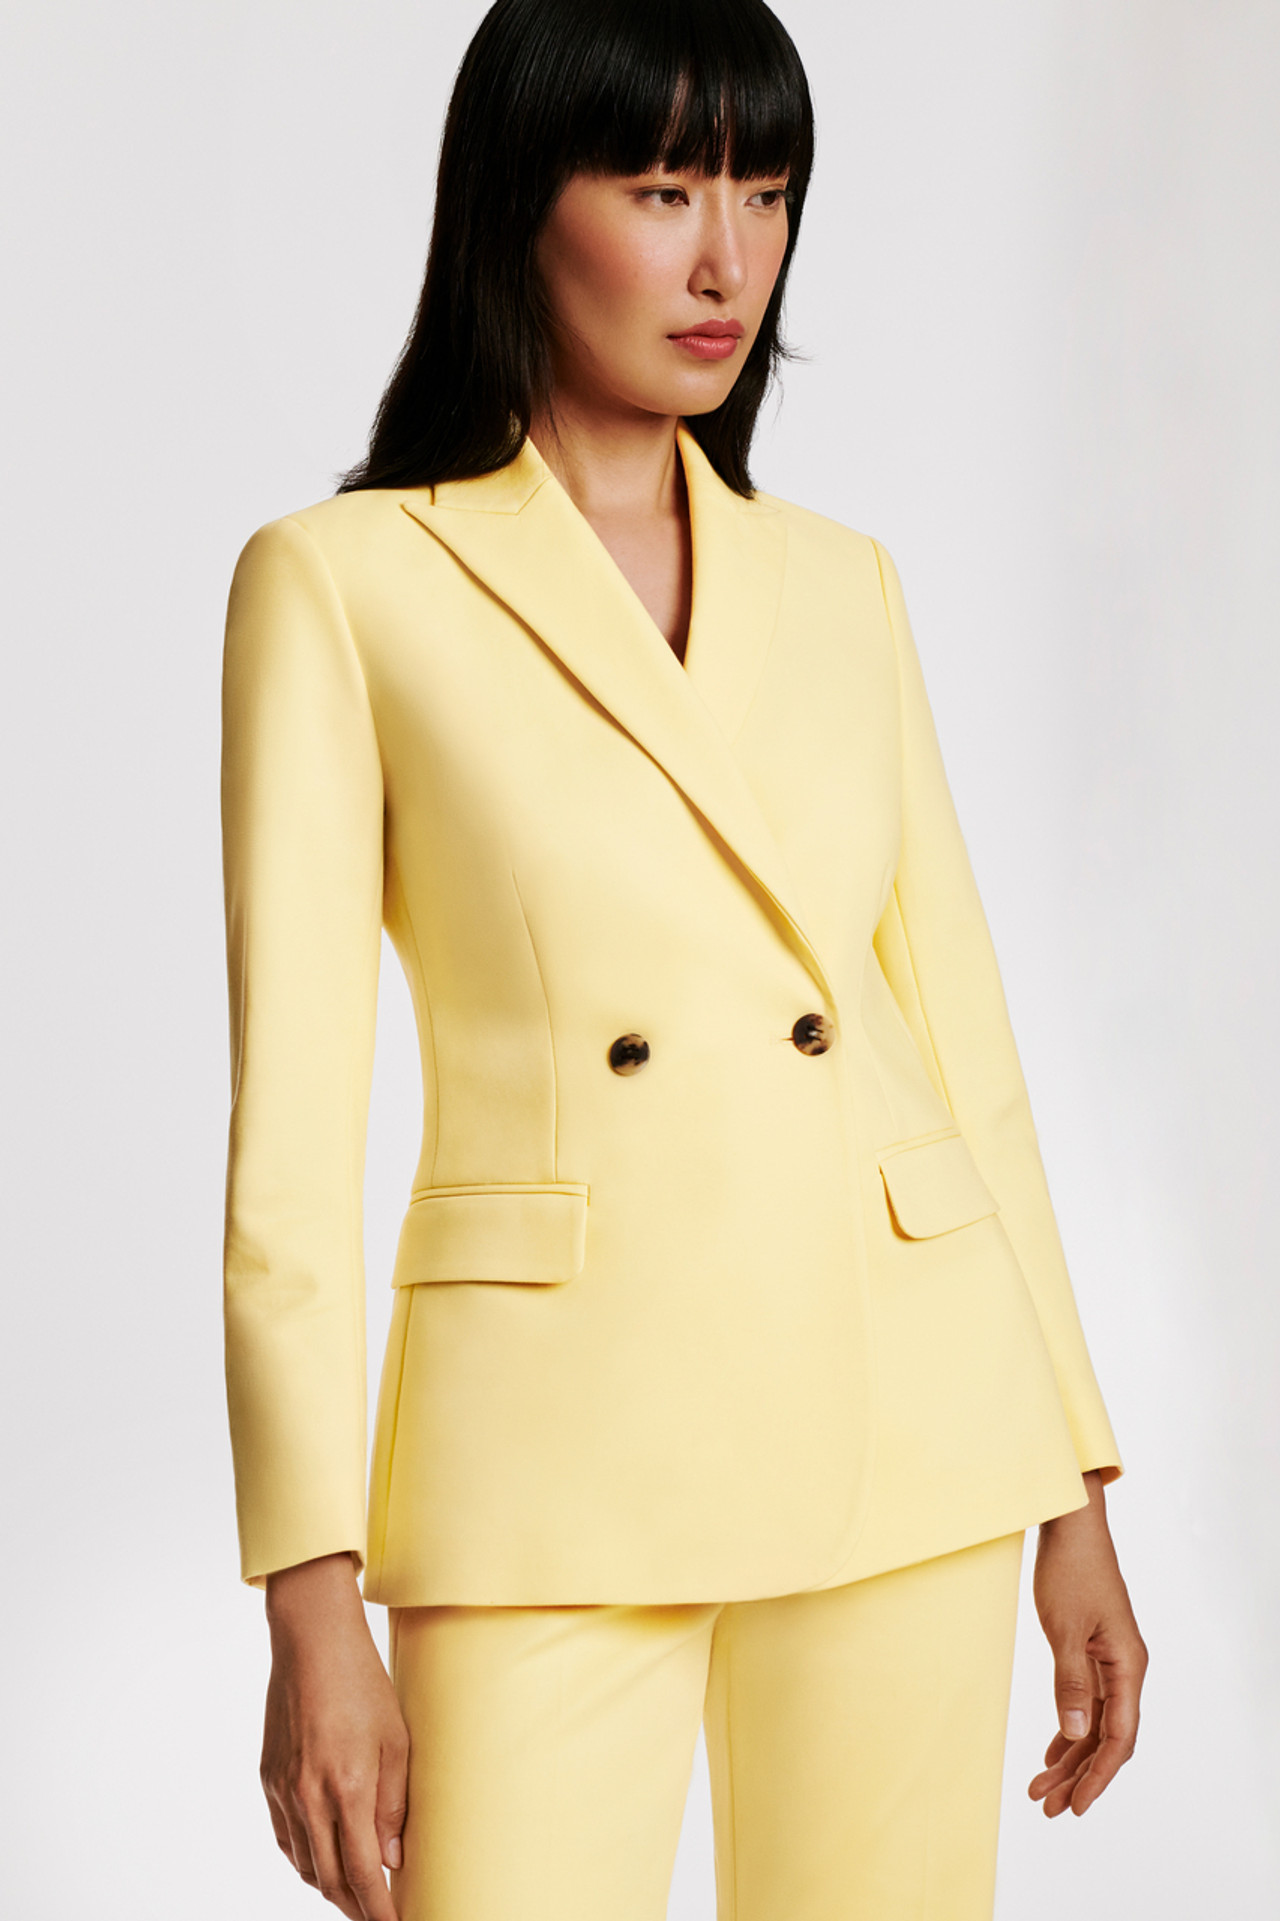 Alvely Dress Meadow Yellow Sculpt Stretch Crepe - Welcome to the Fold LTD